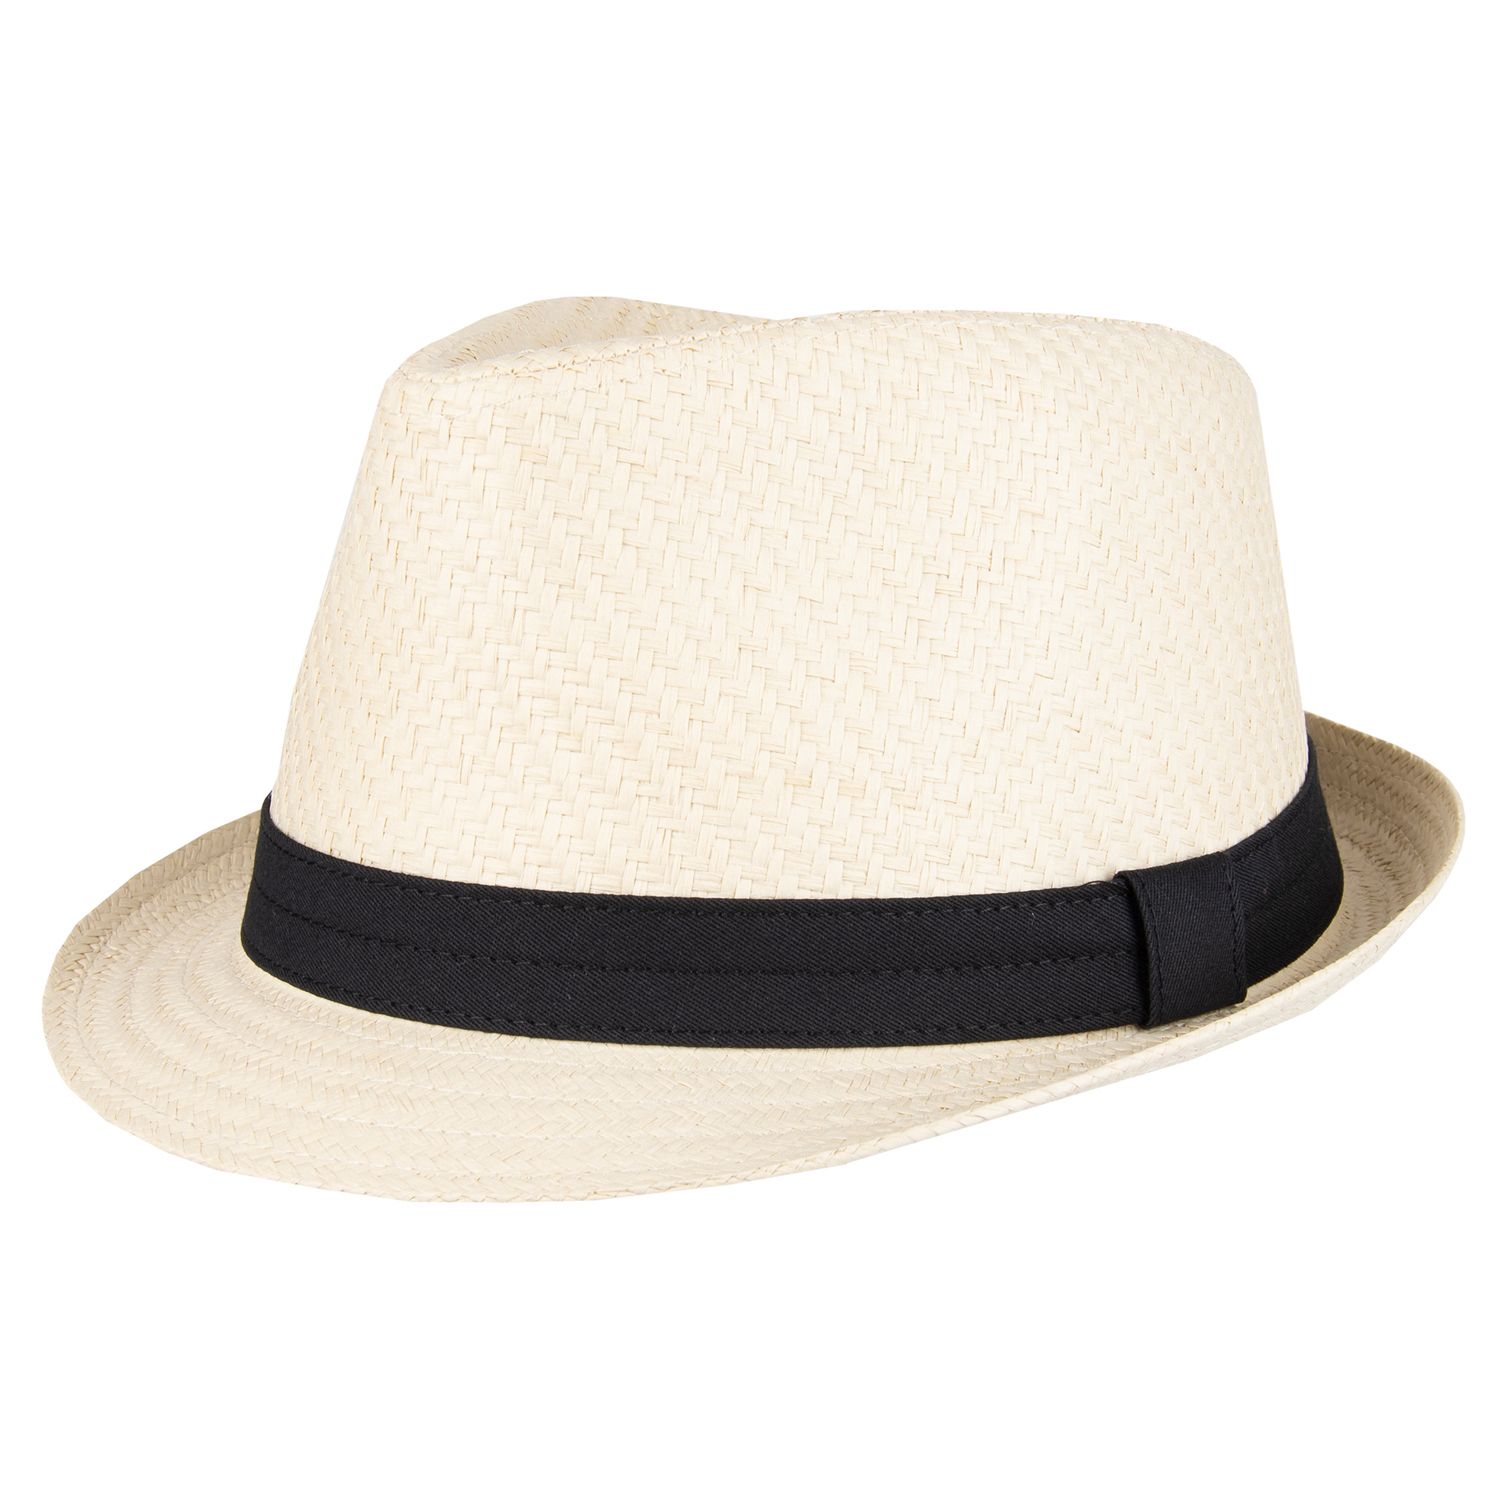 A fedora is a great accessory to add to any Eclectic Grandpa outfit.